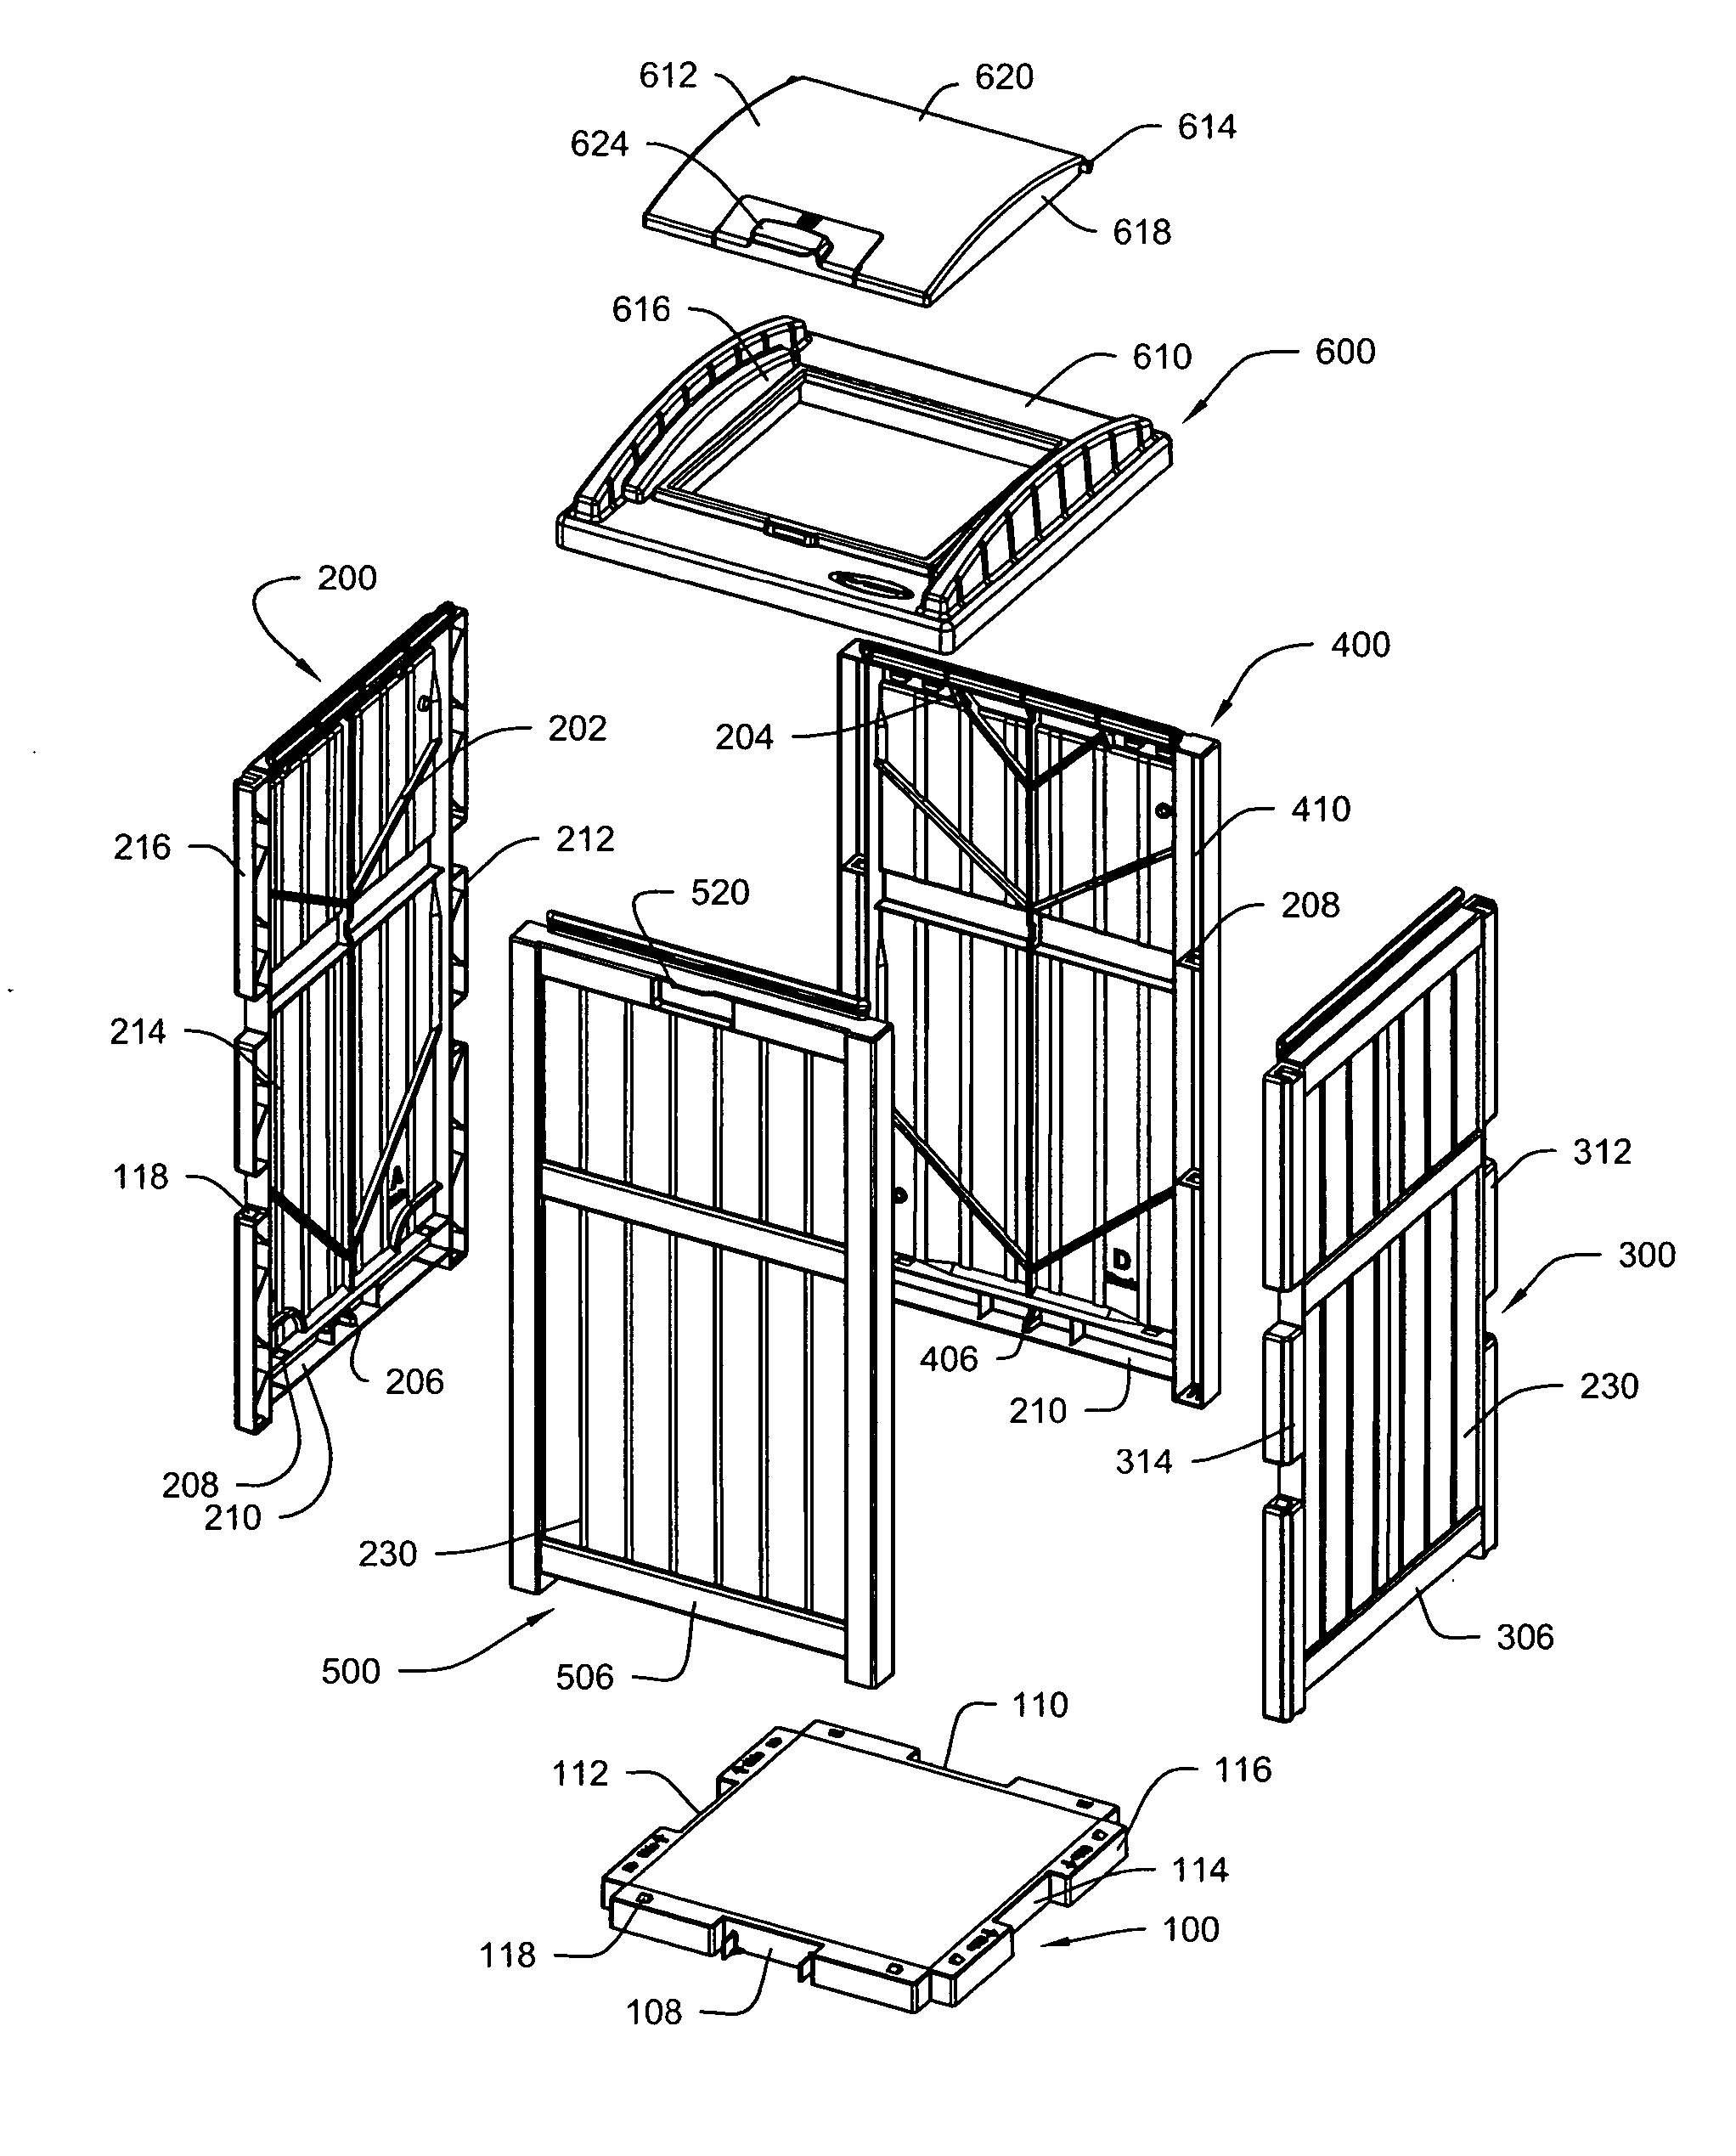 Secure trash container assembly